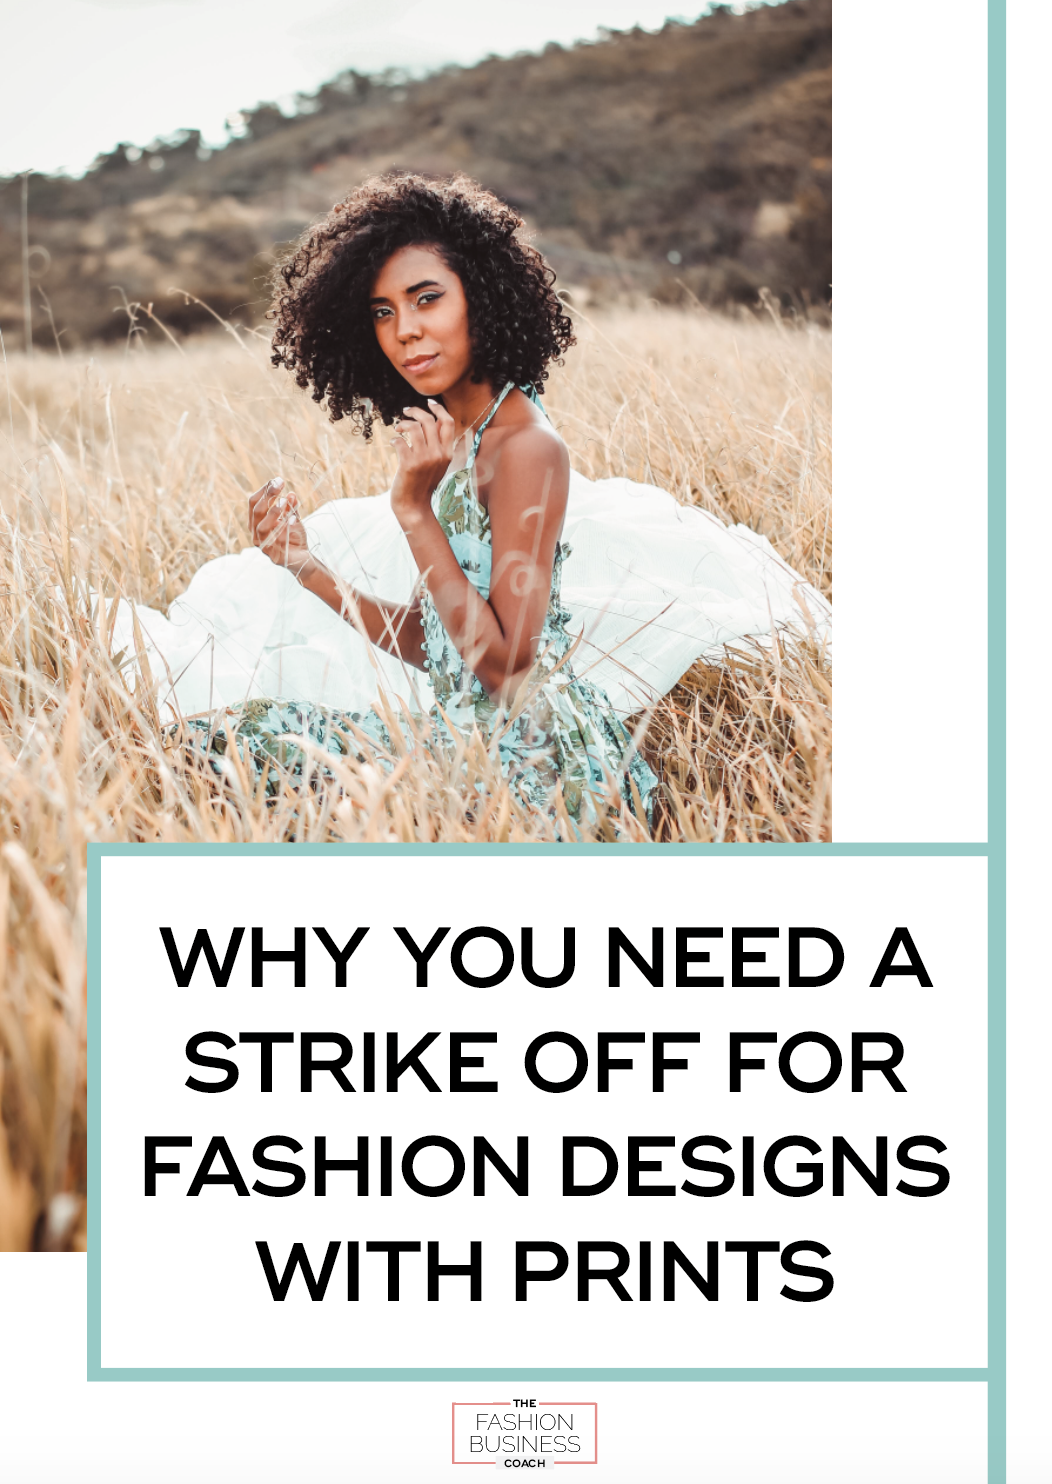 Why You Need a Strike Off for Fashion Designs with Prints 2.png